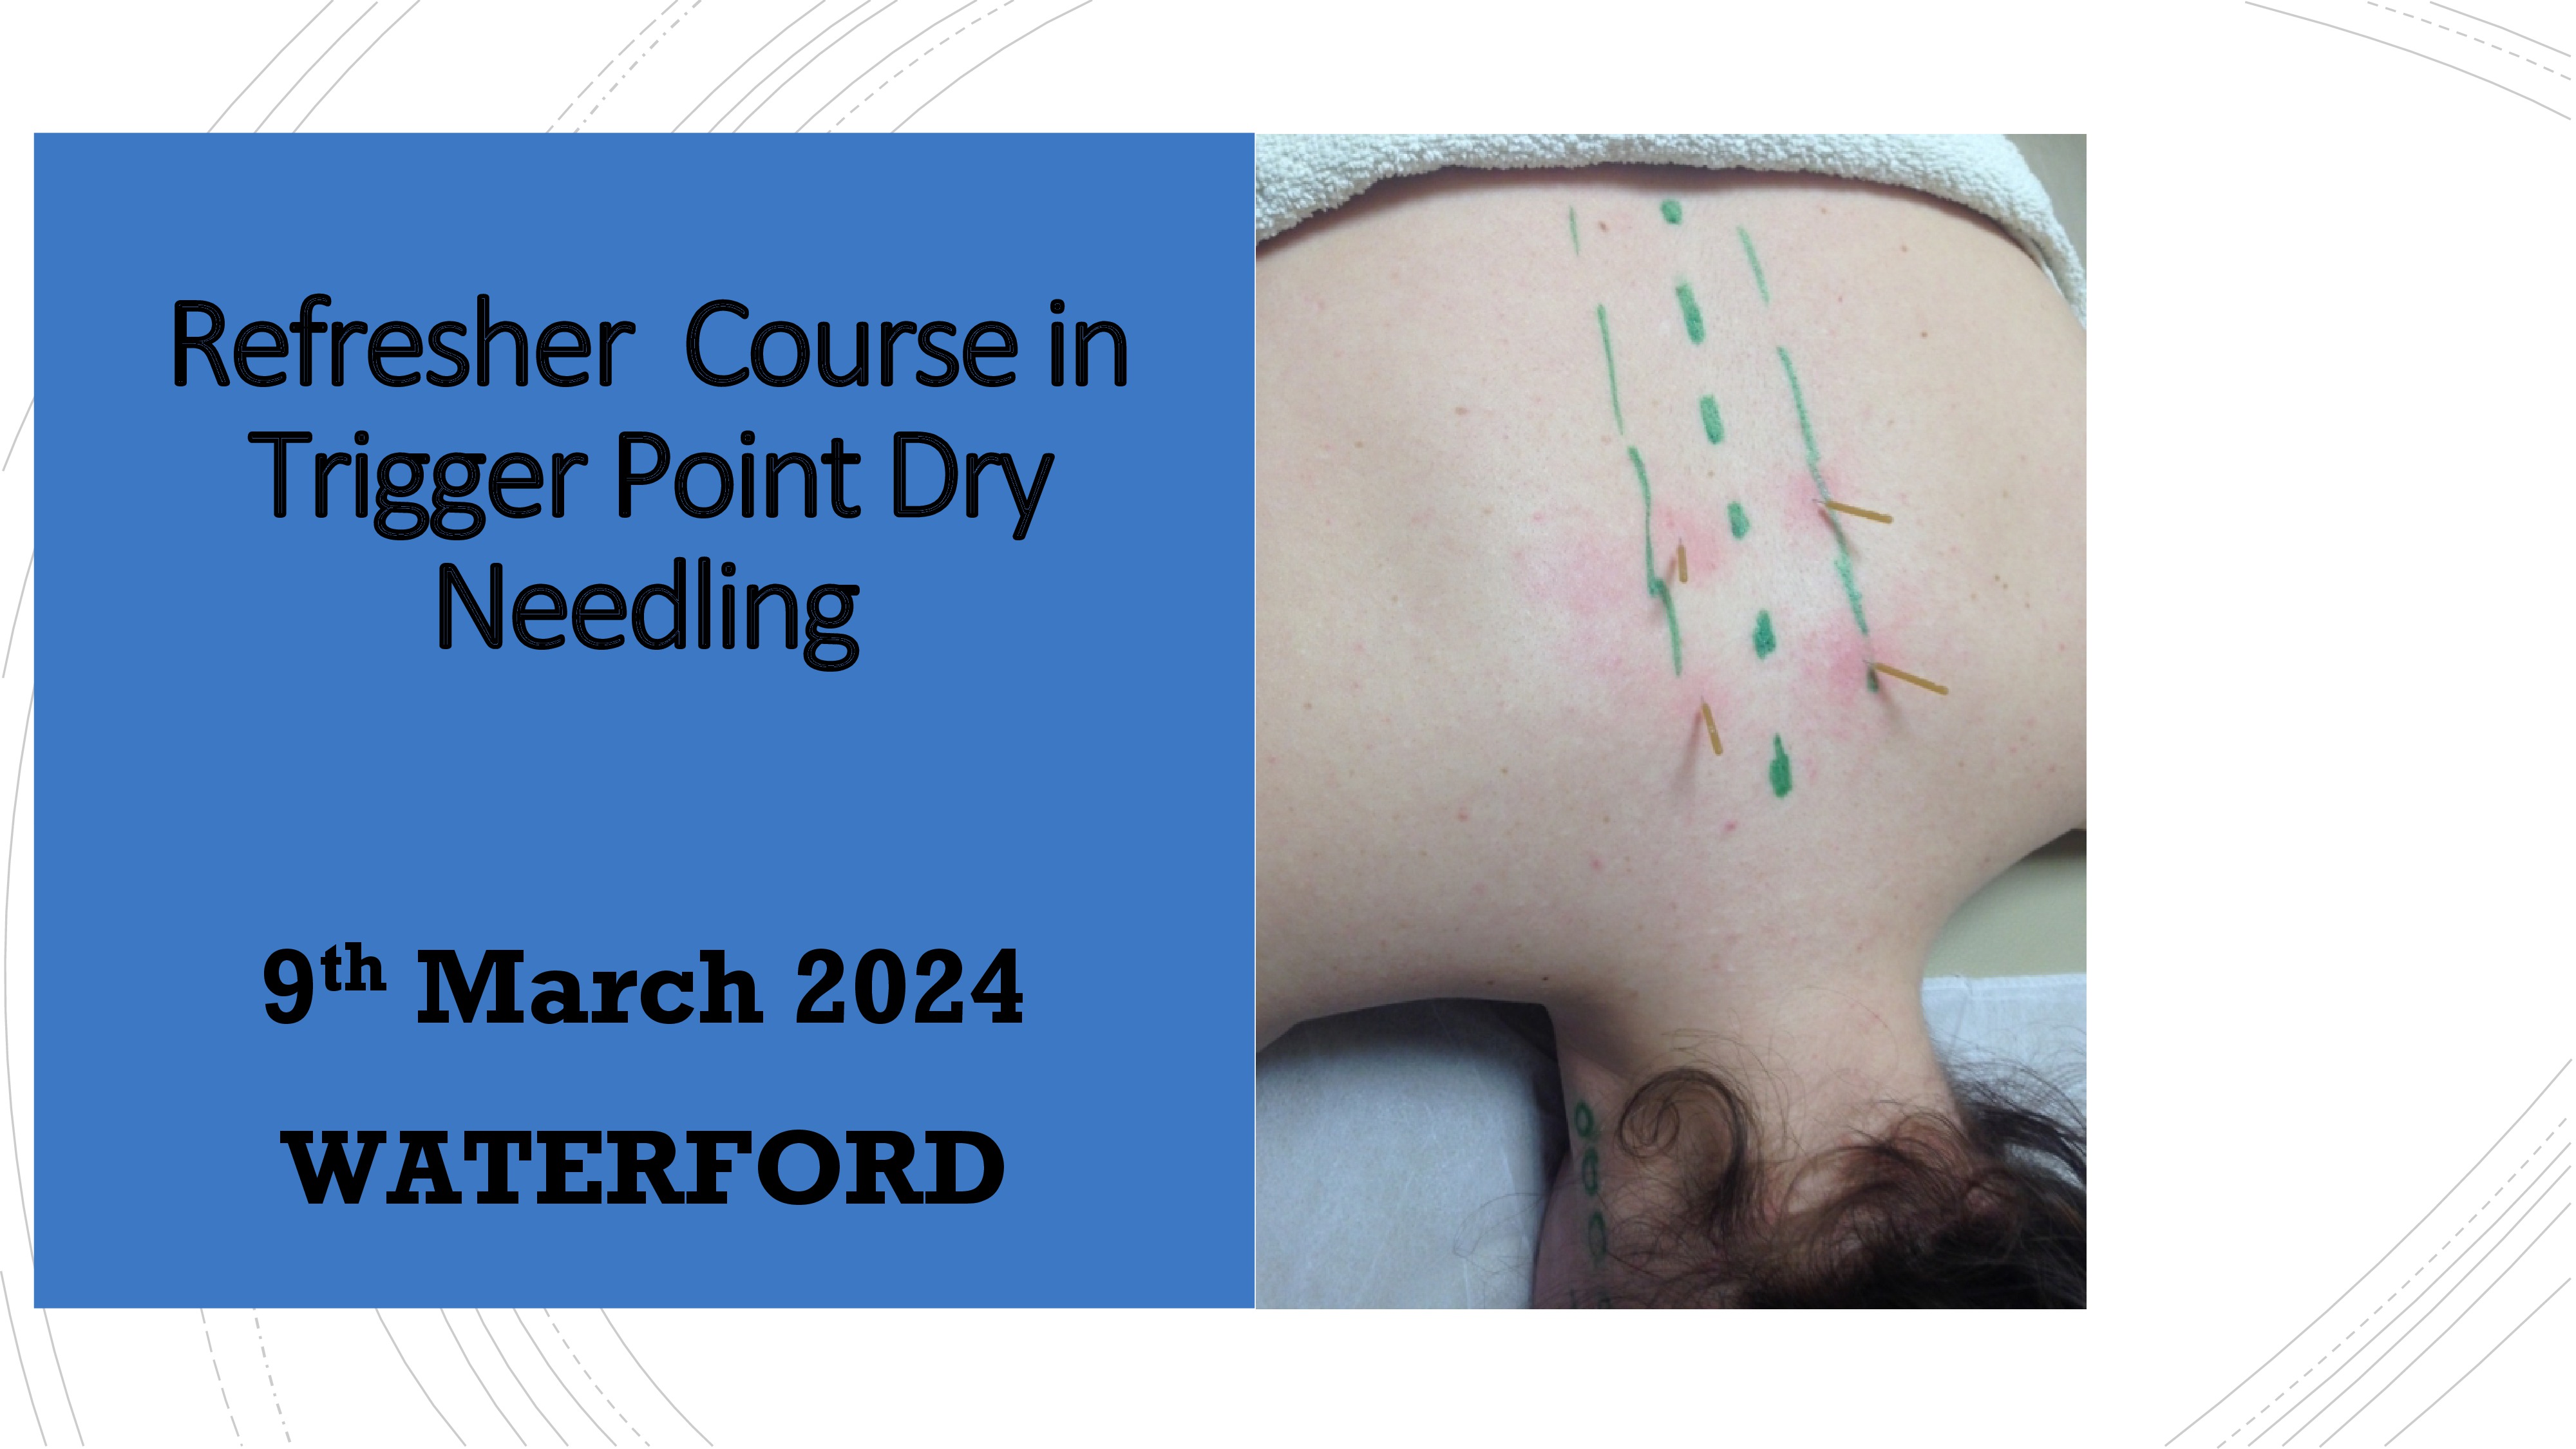 Refresher Course in Trigger Point Dry Needling, 9th March 2024, WATERFORD